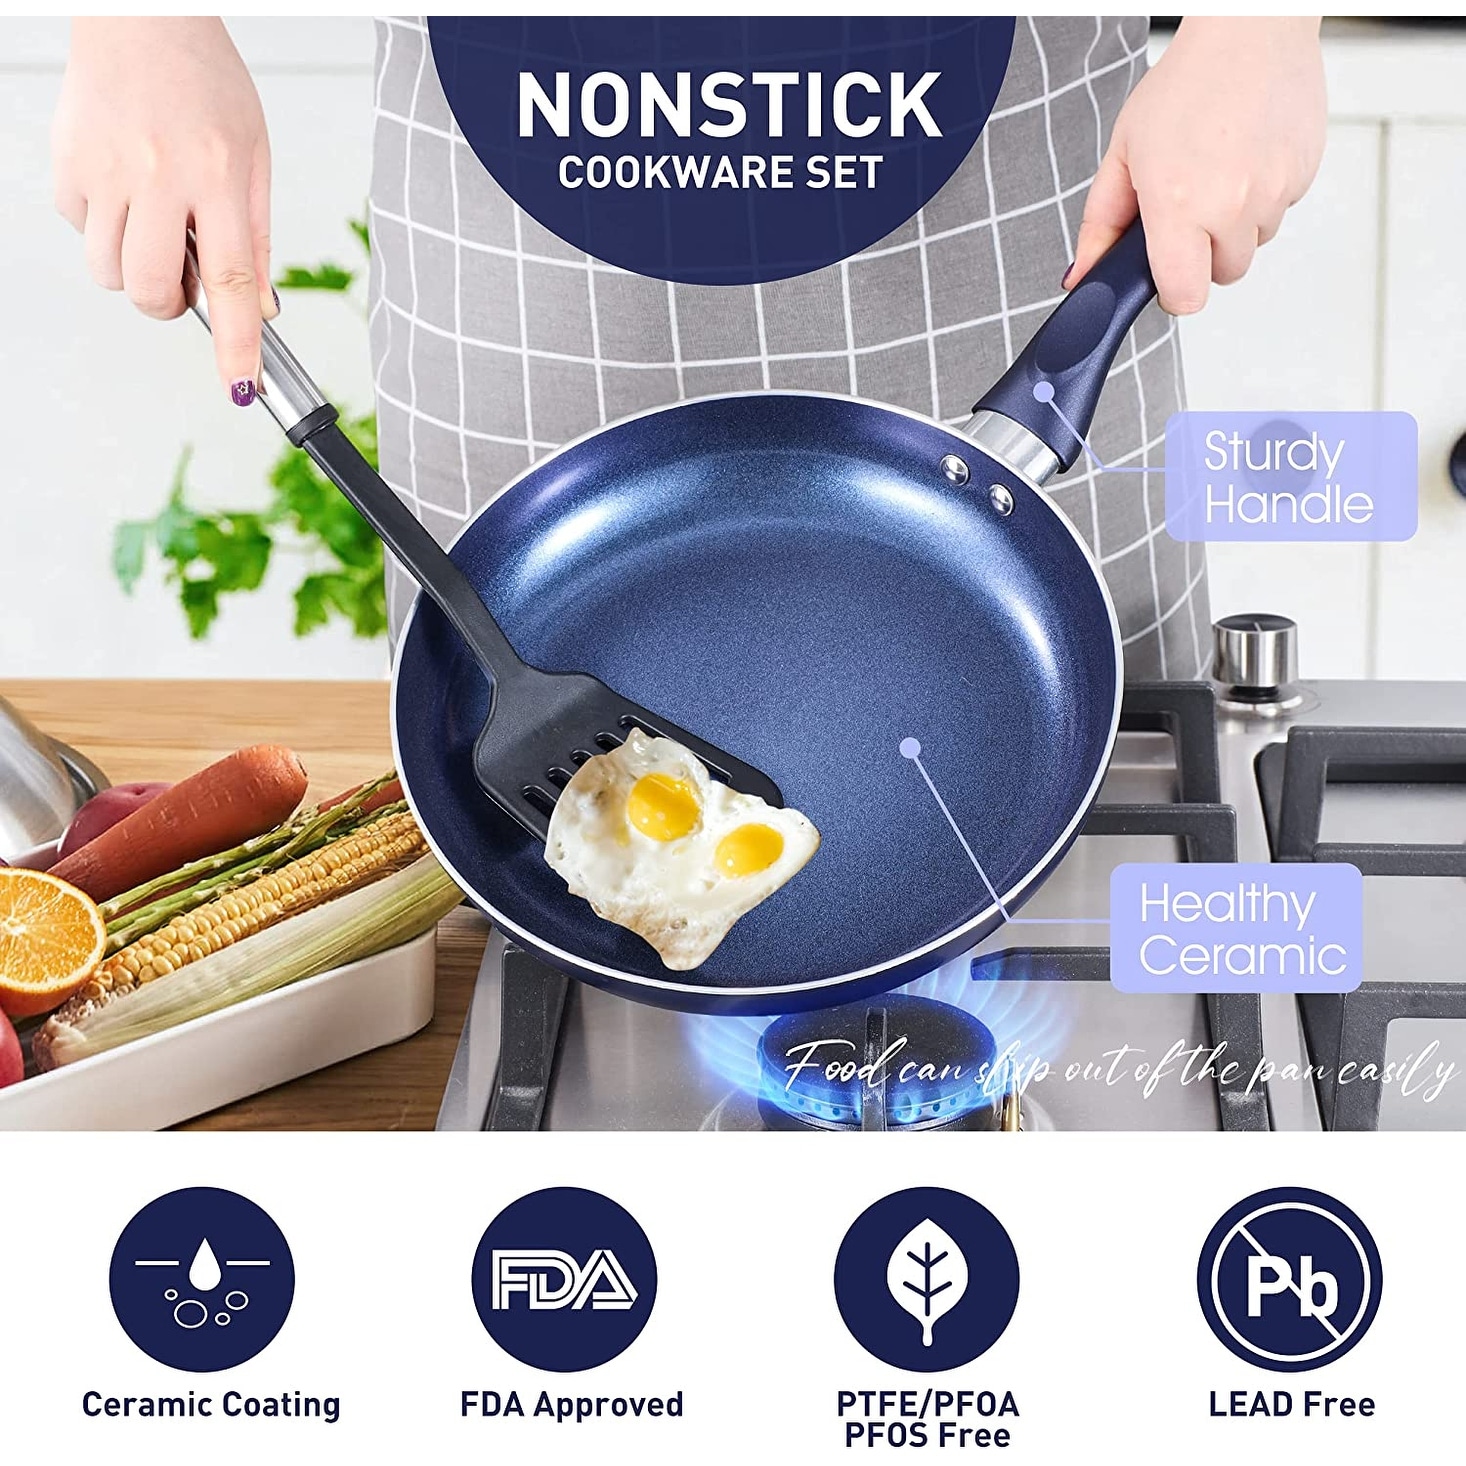 https://ak1.ostkcdn.com/images/products/is/images/direct/c63e5910ee171ce0d6ac7e92ea05106fe74aec0c/6-piece-Non-stick-Cookware-Set-Pots-and-Pans-Set-for-Cooking---Ceramic-Coating-Saucepan%2C-Stock-Pot-with-Lid%2C-Frying-Pan%2C-Copper.jpg